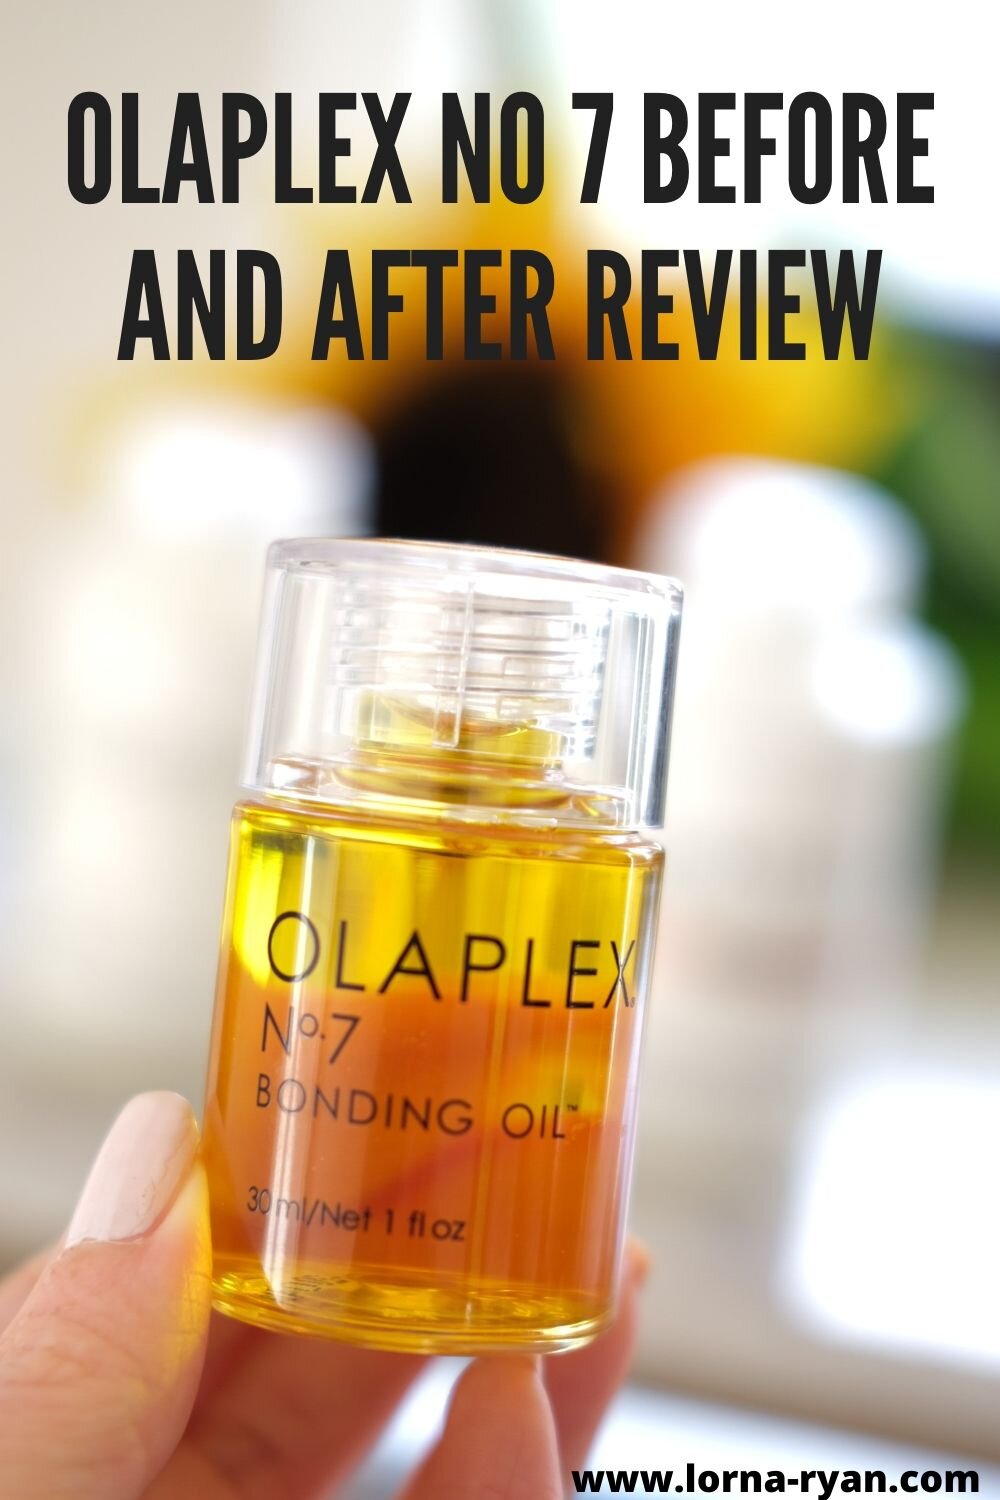 Olaplex Before and After Hair Review - Olaplex No. 3 Hair Perfector, Olaplex No. 6 Bond Smoother and Olaplex No. 7 Bonding Oil. This is the ultimate guide on How to Use Olaplex No. 7 at Home. Like can you leave it overnight? How long does it last? H…